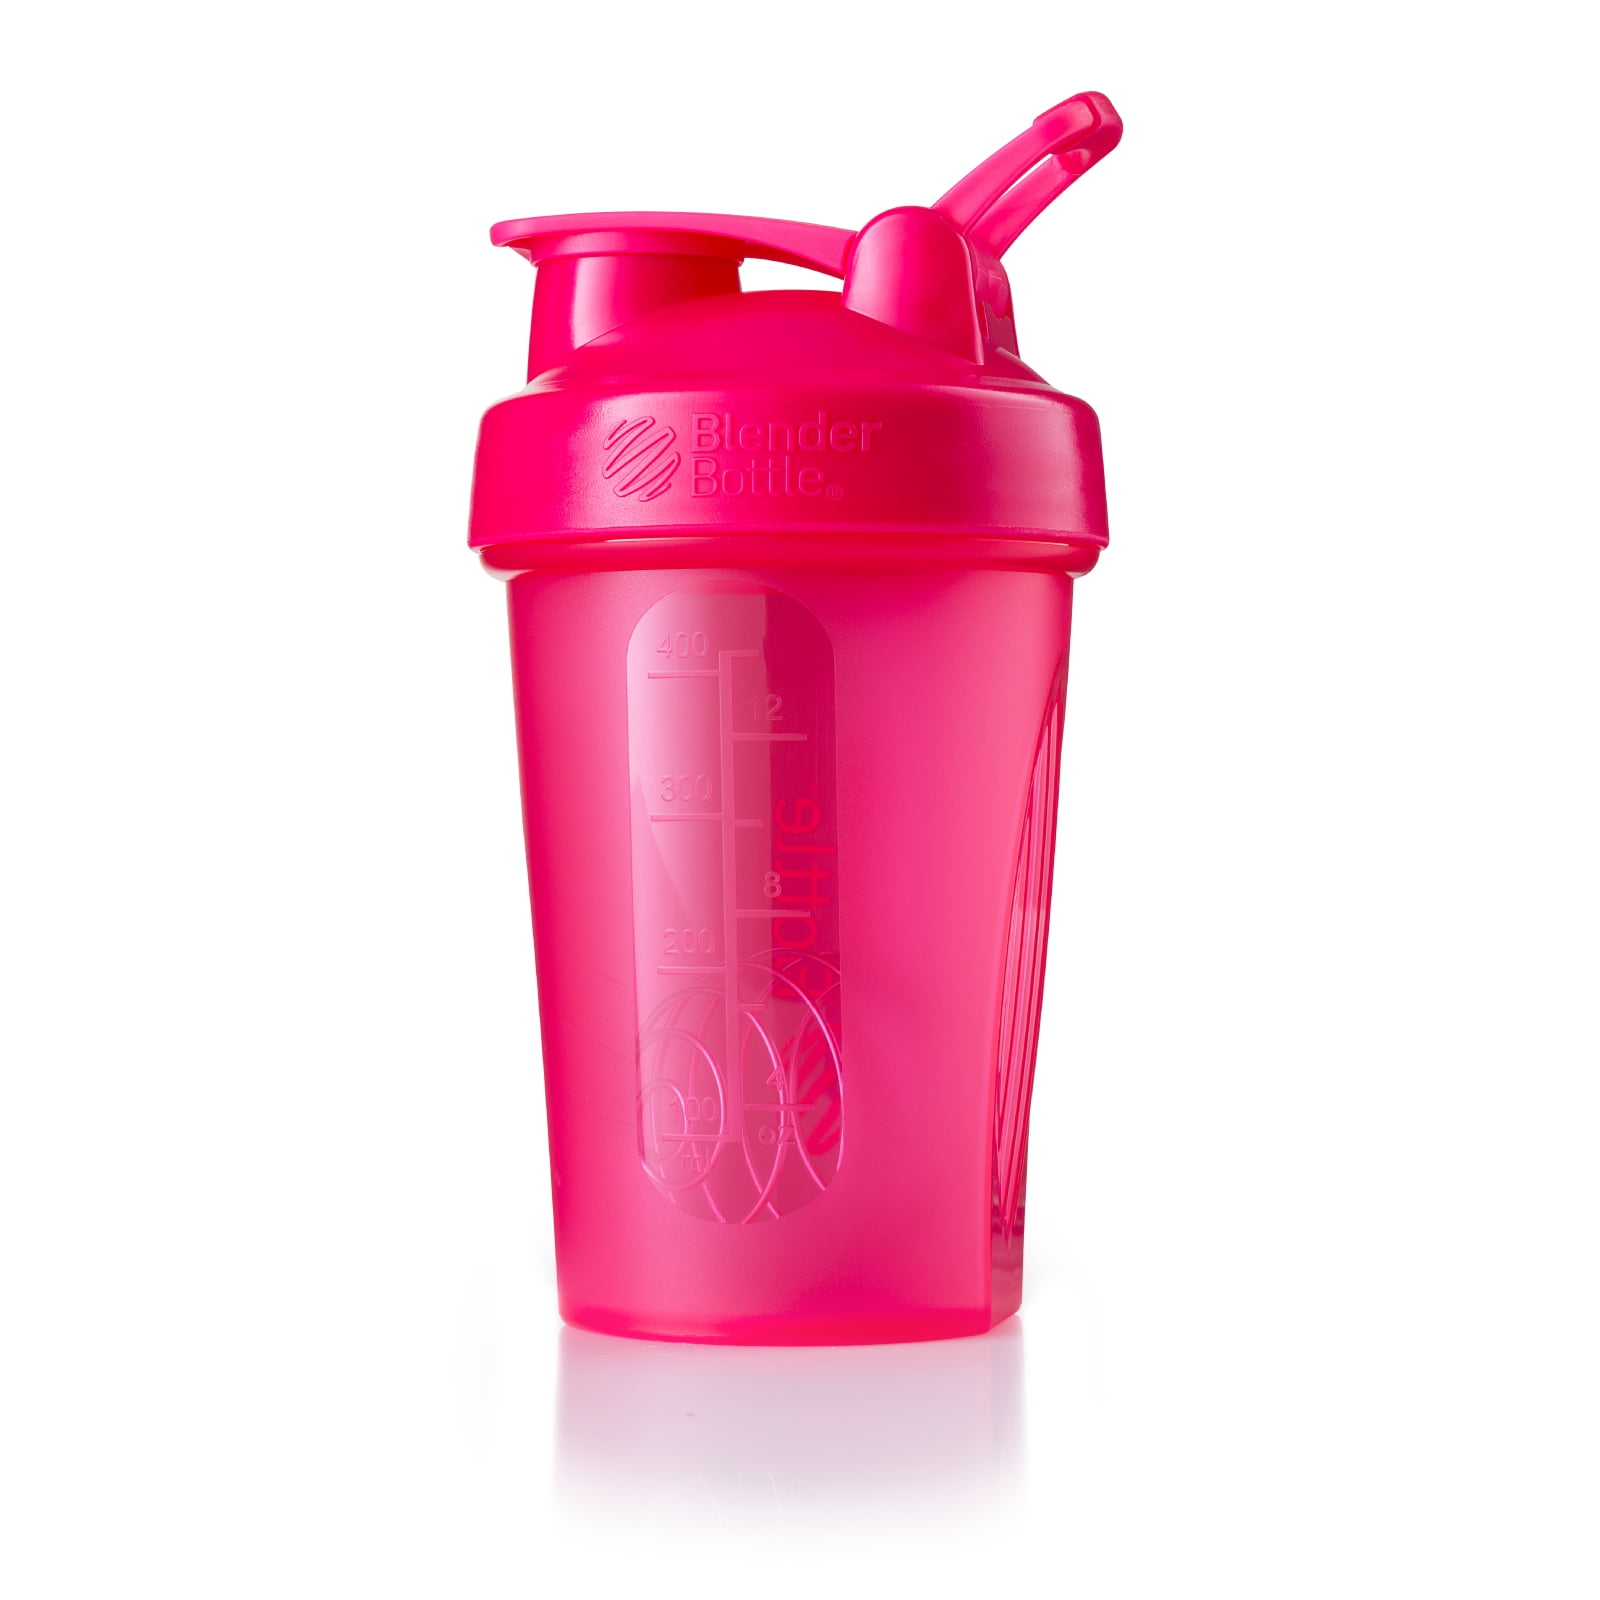 BuckedUp has the cutest shaker bottles 😍 use code “RILEYH20” for 20%